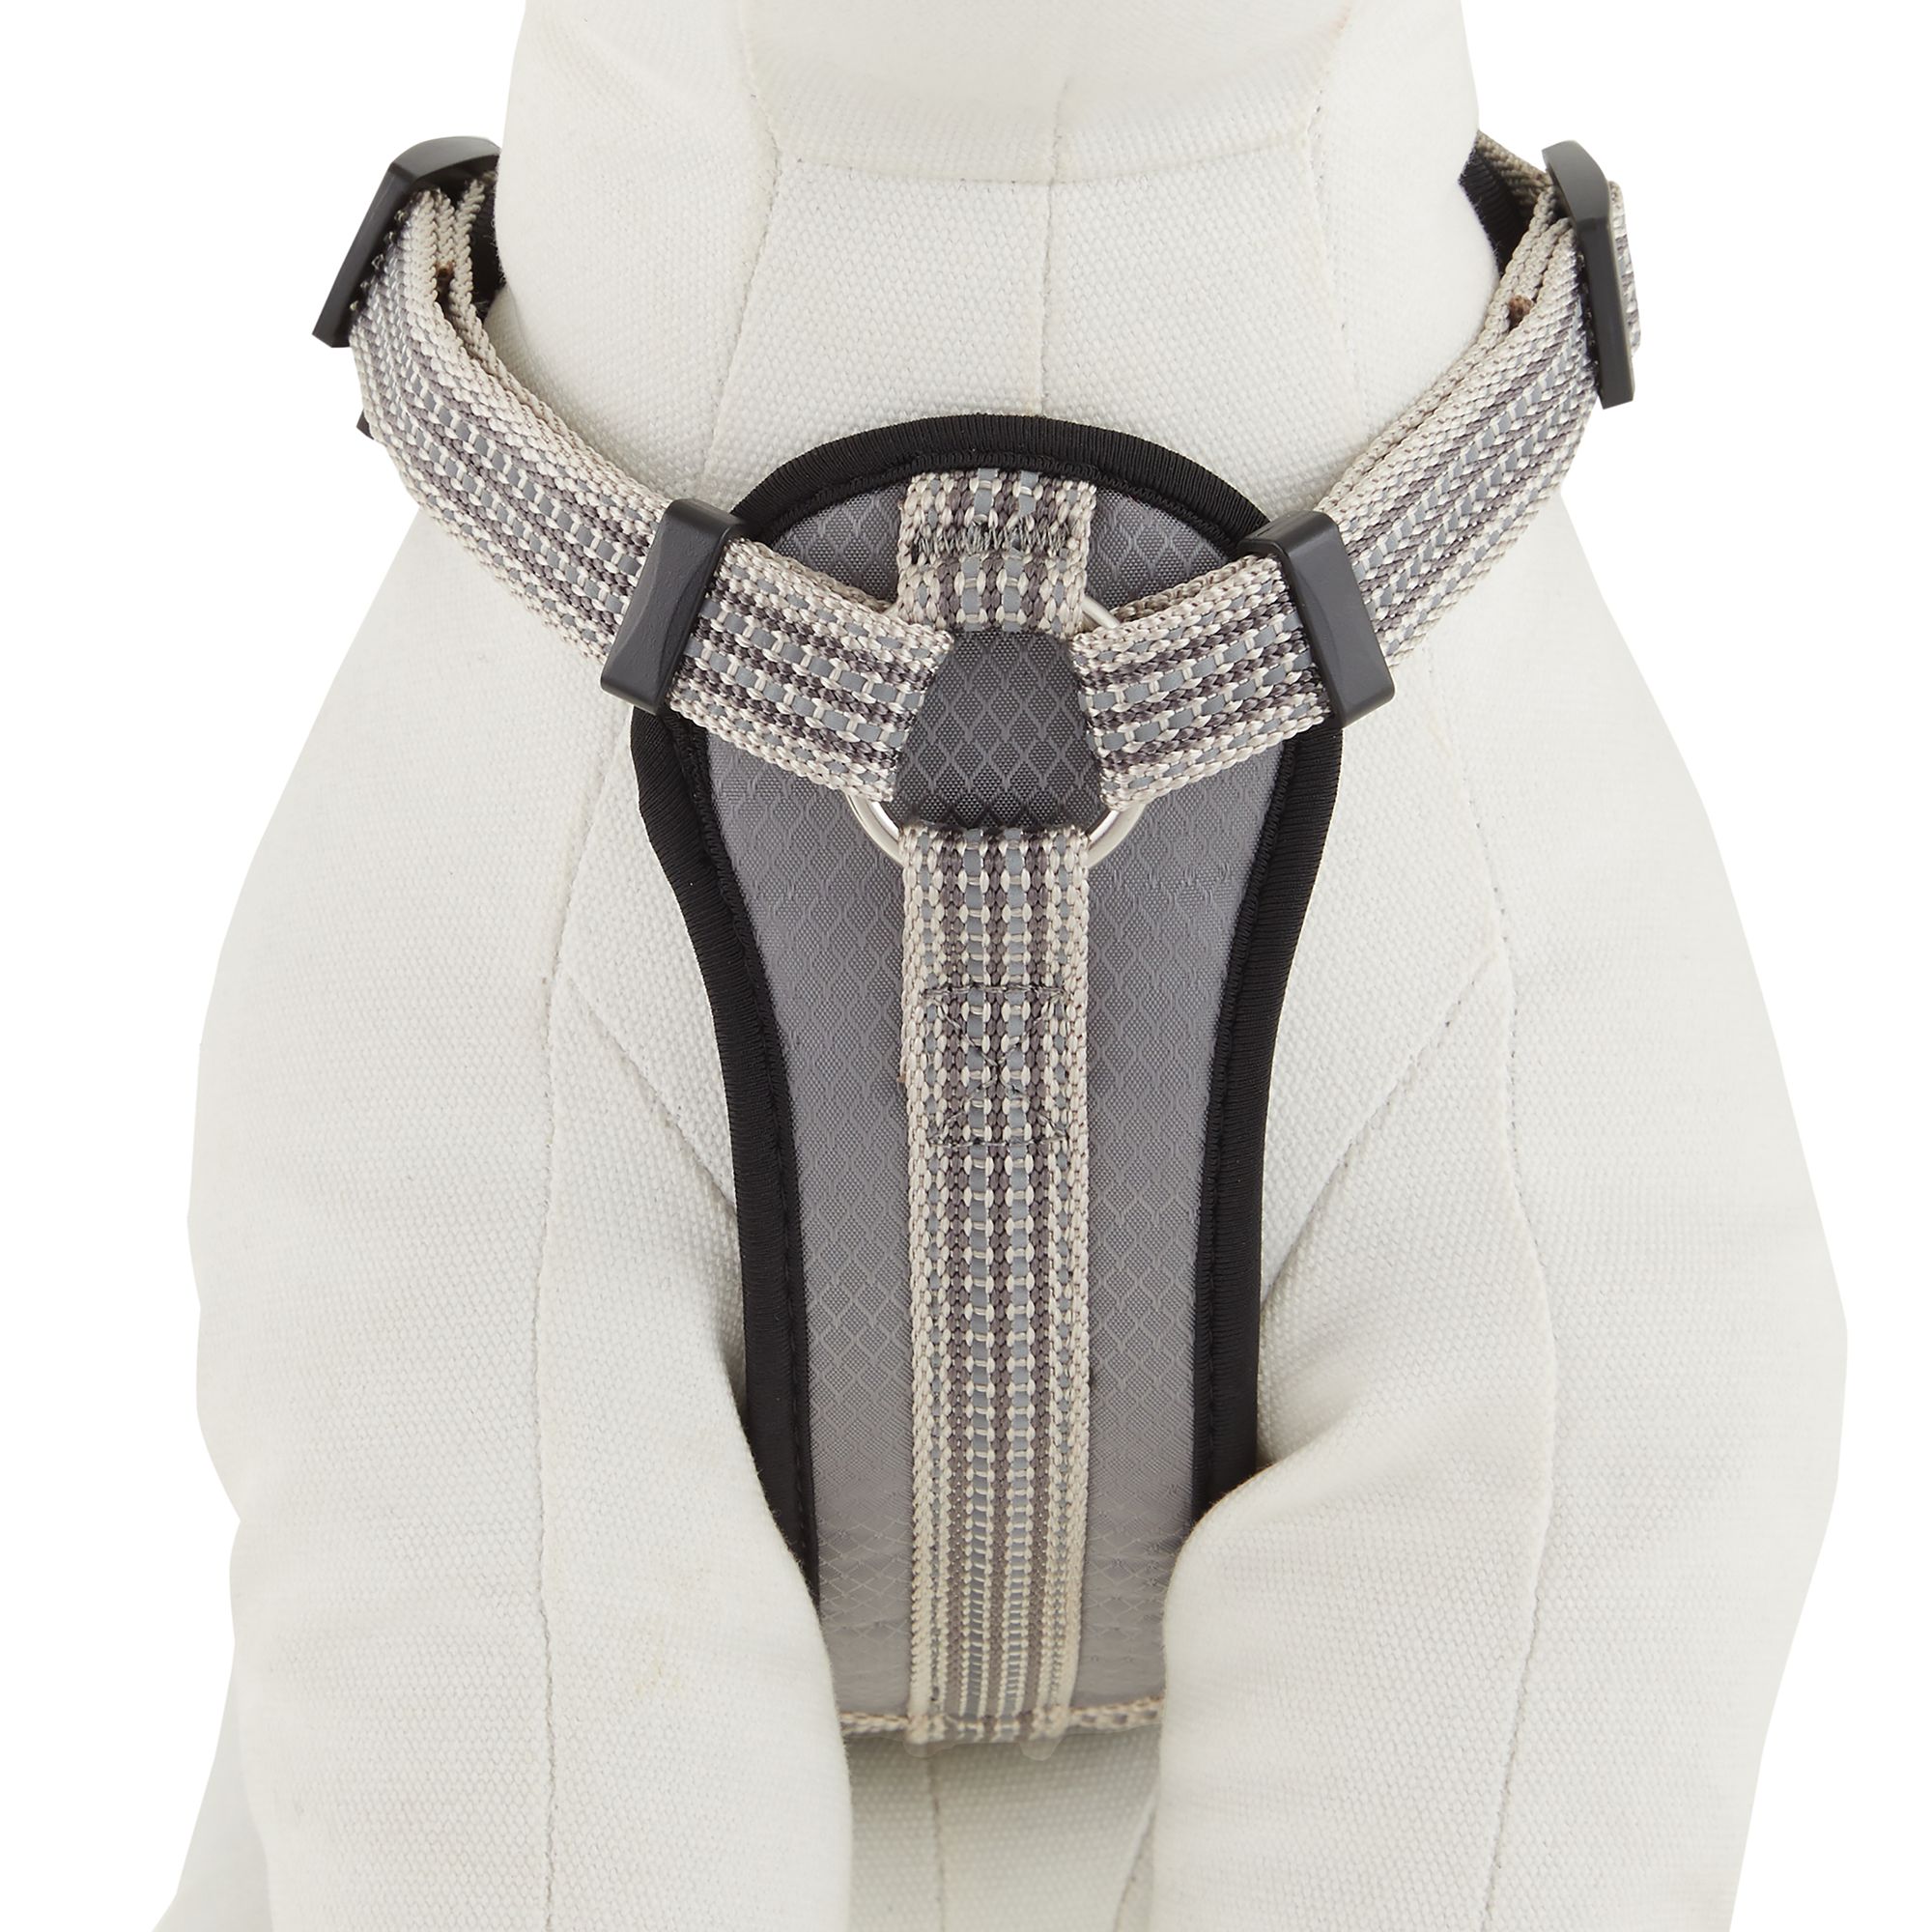 kong harness with pocket